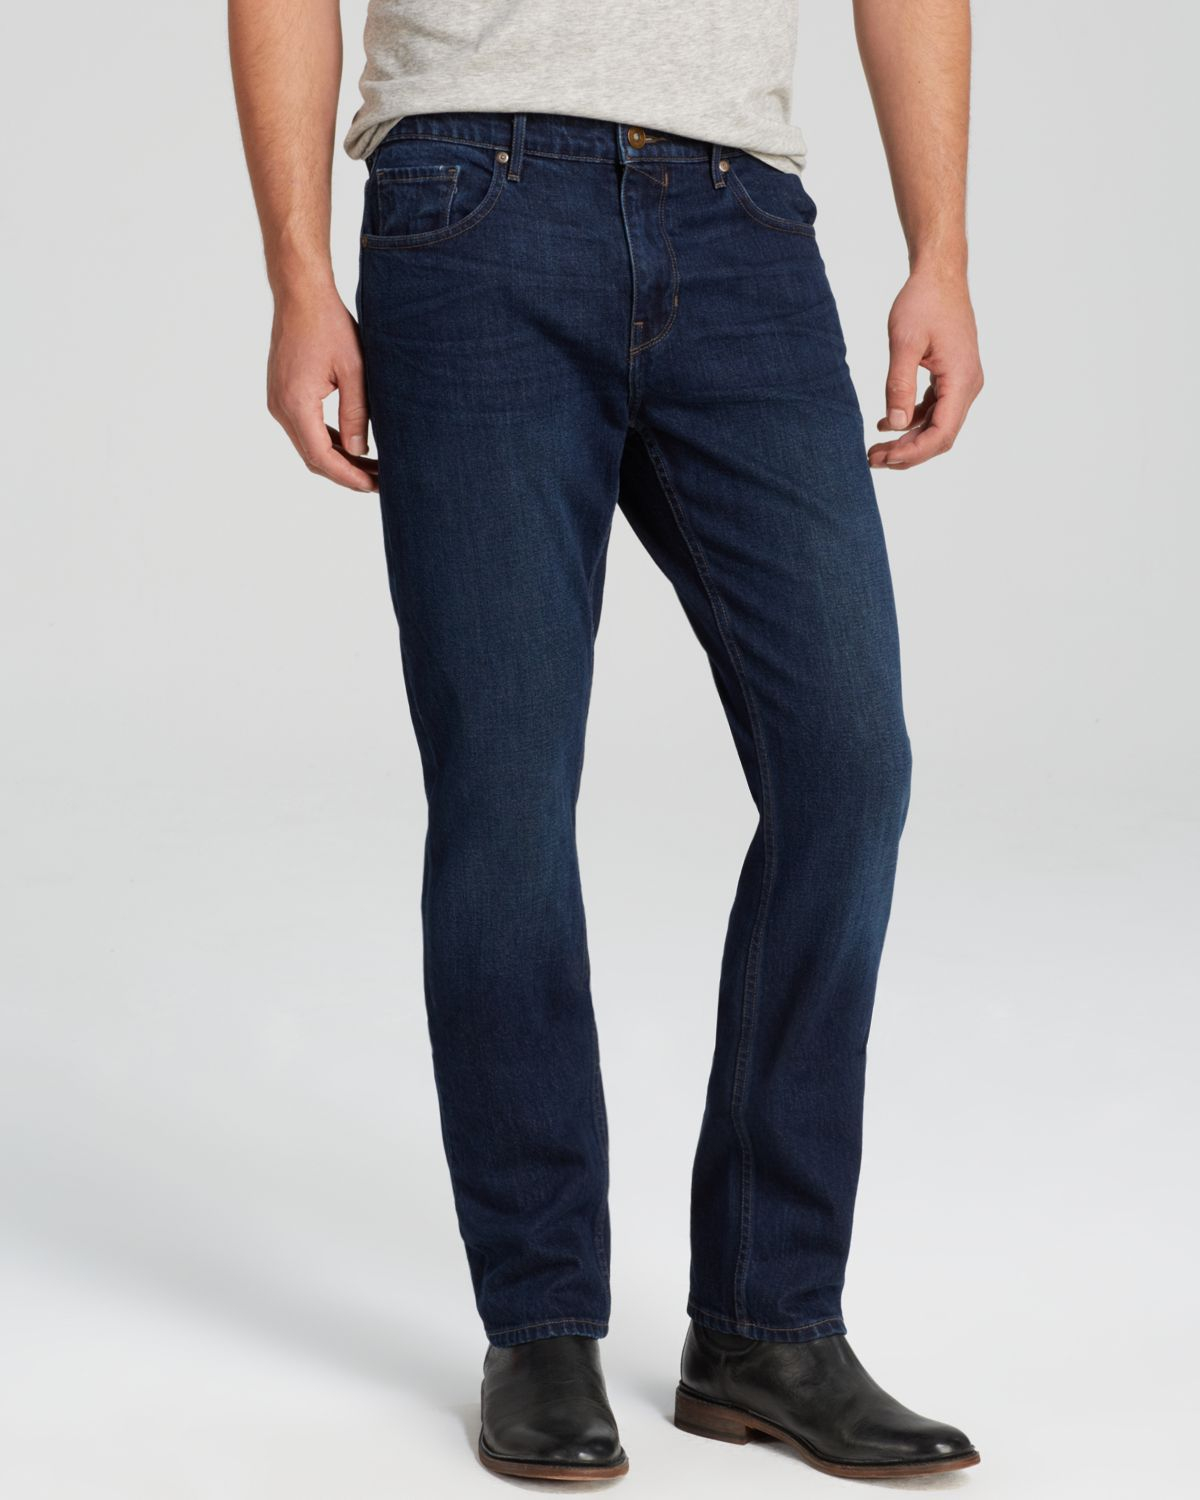 Lyst - Paige Jeans Federal Slim in Bass in Blue for Men